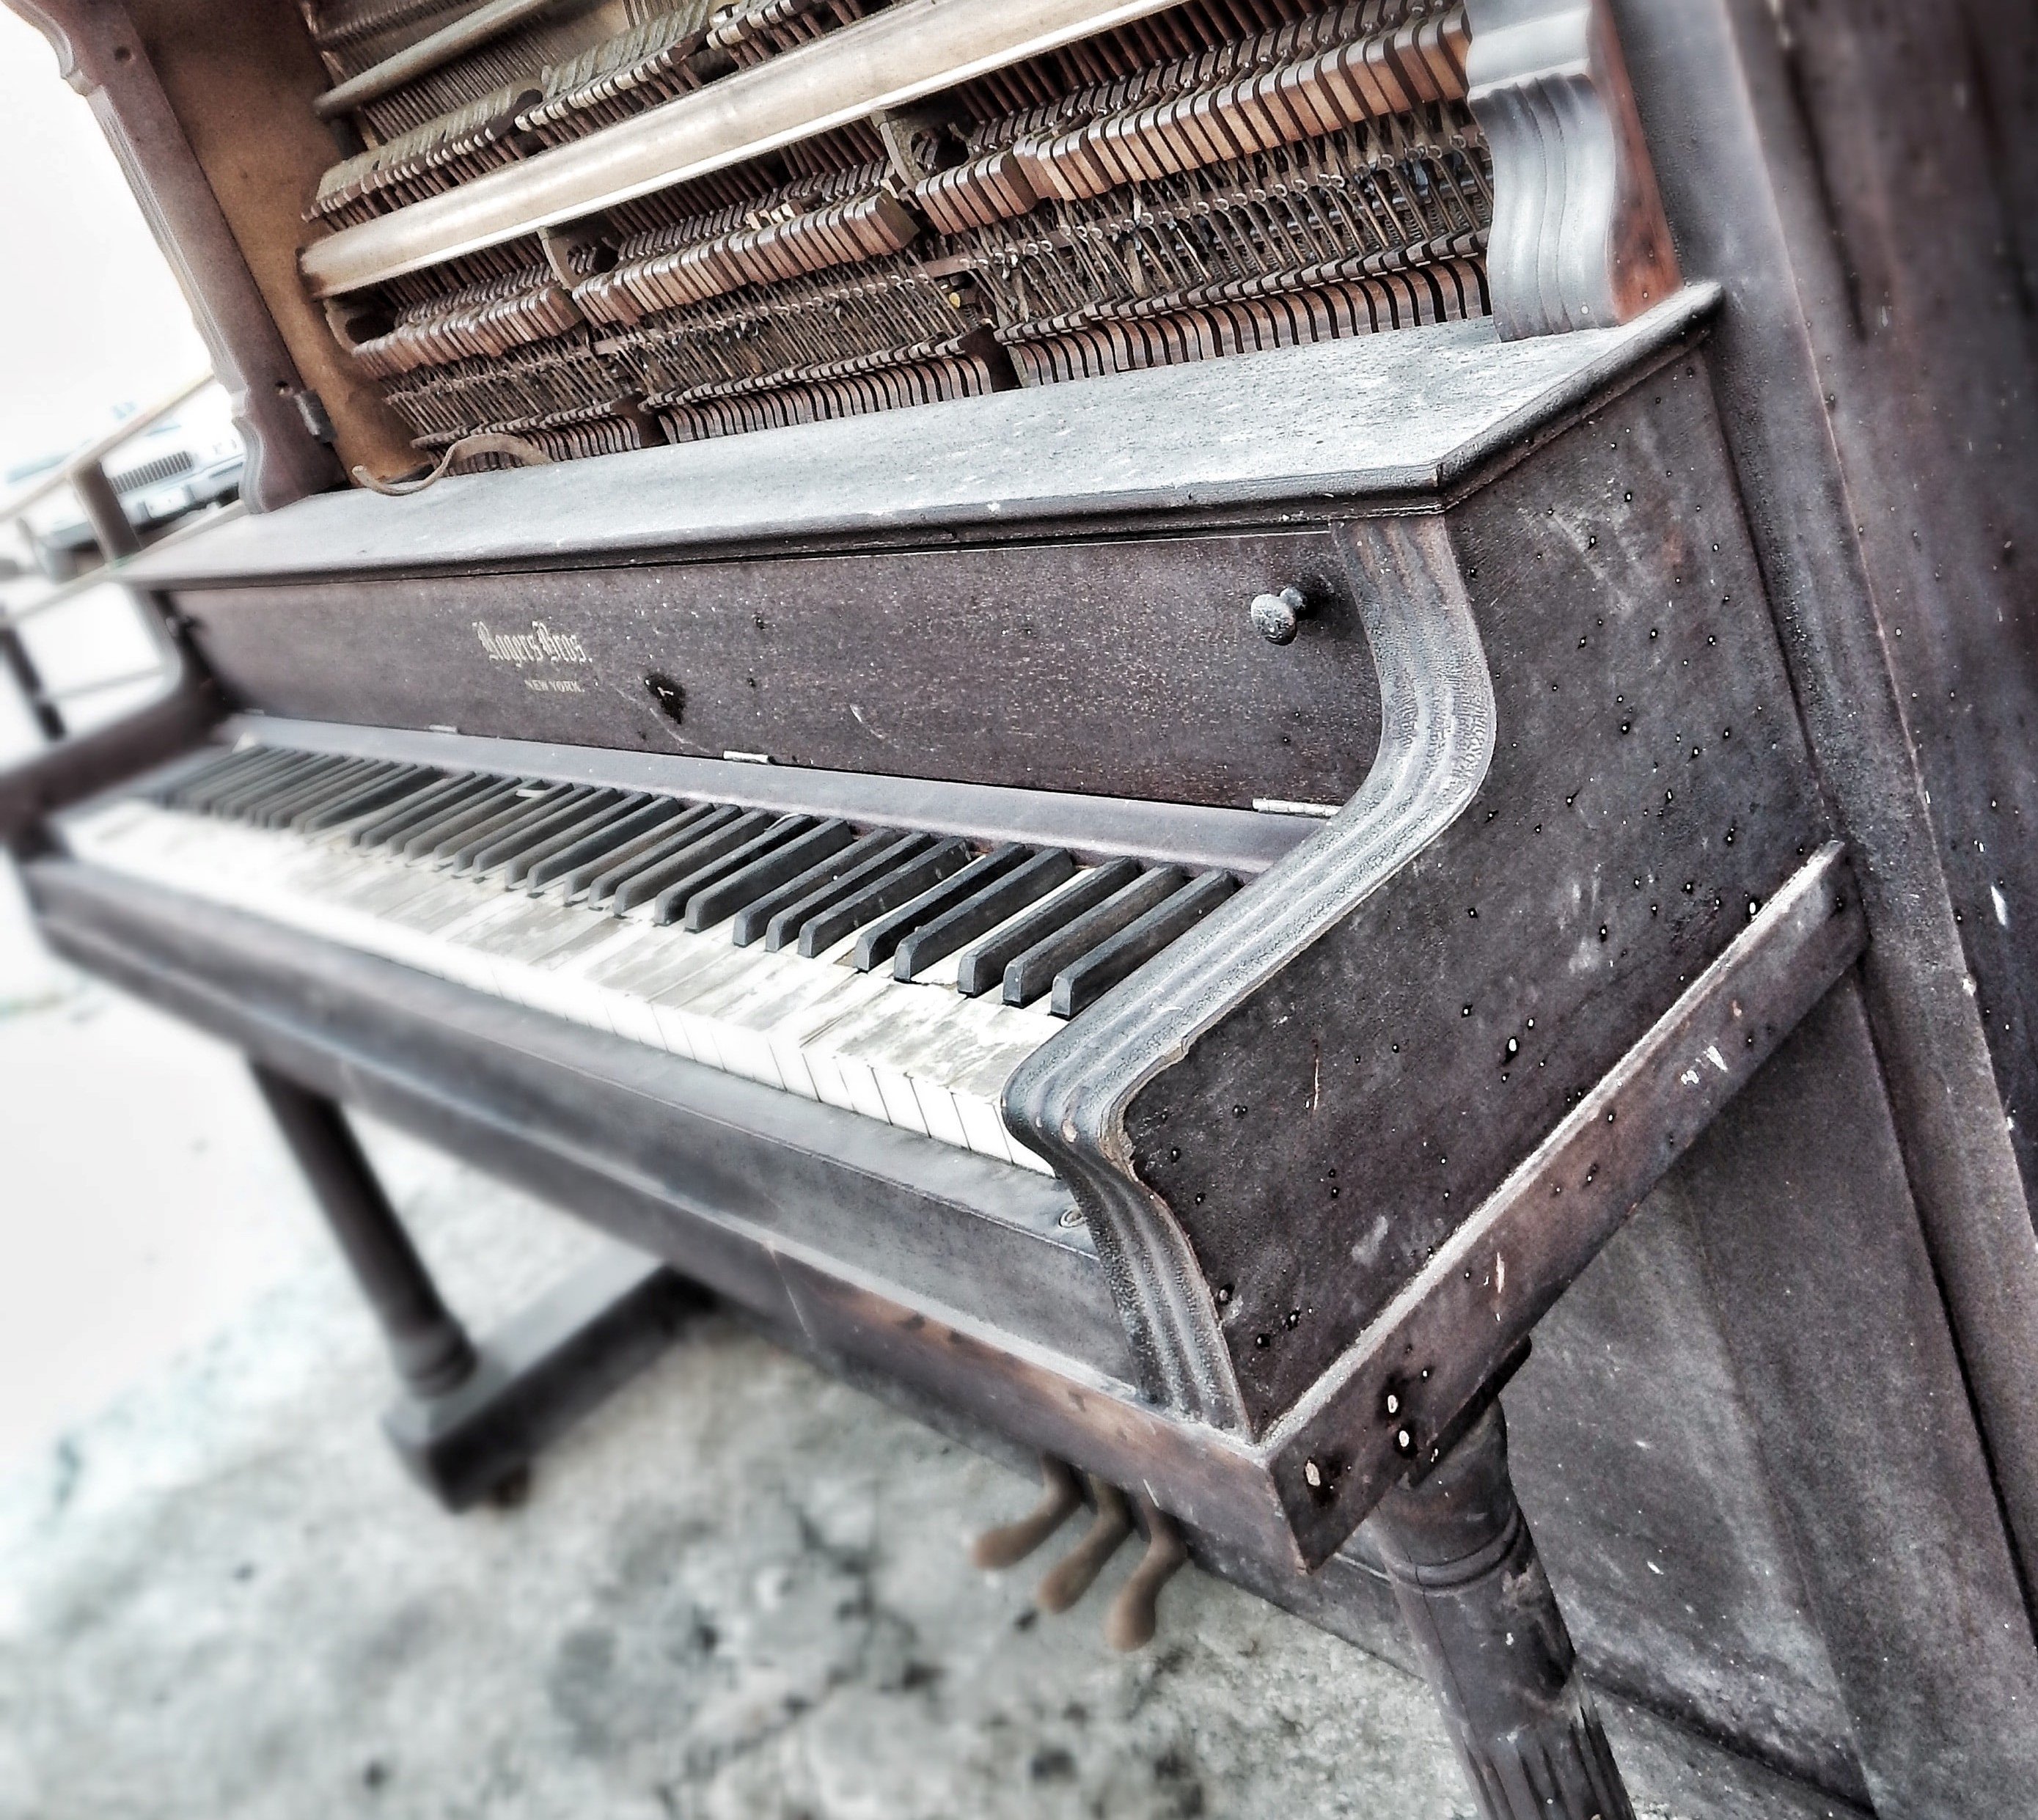 Shortly after, Adele moved the piano into her house but her parents were furious with her. | Source: Unsplash